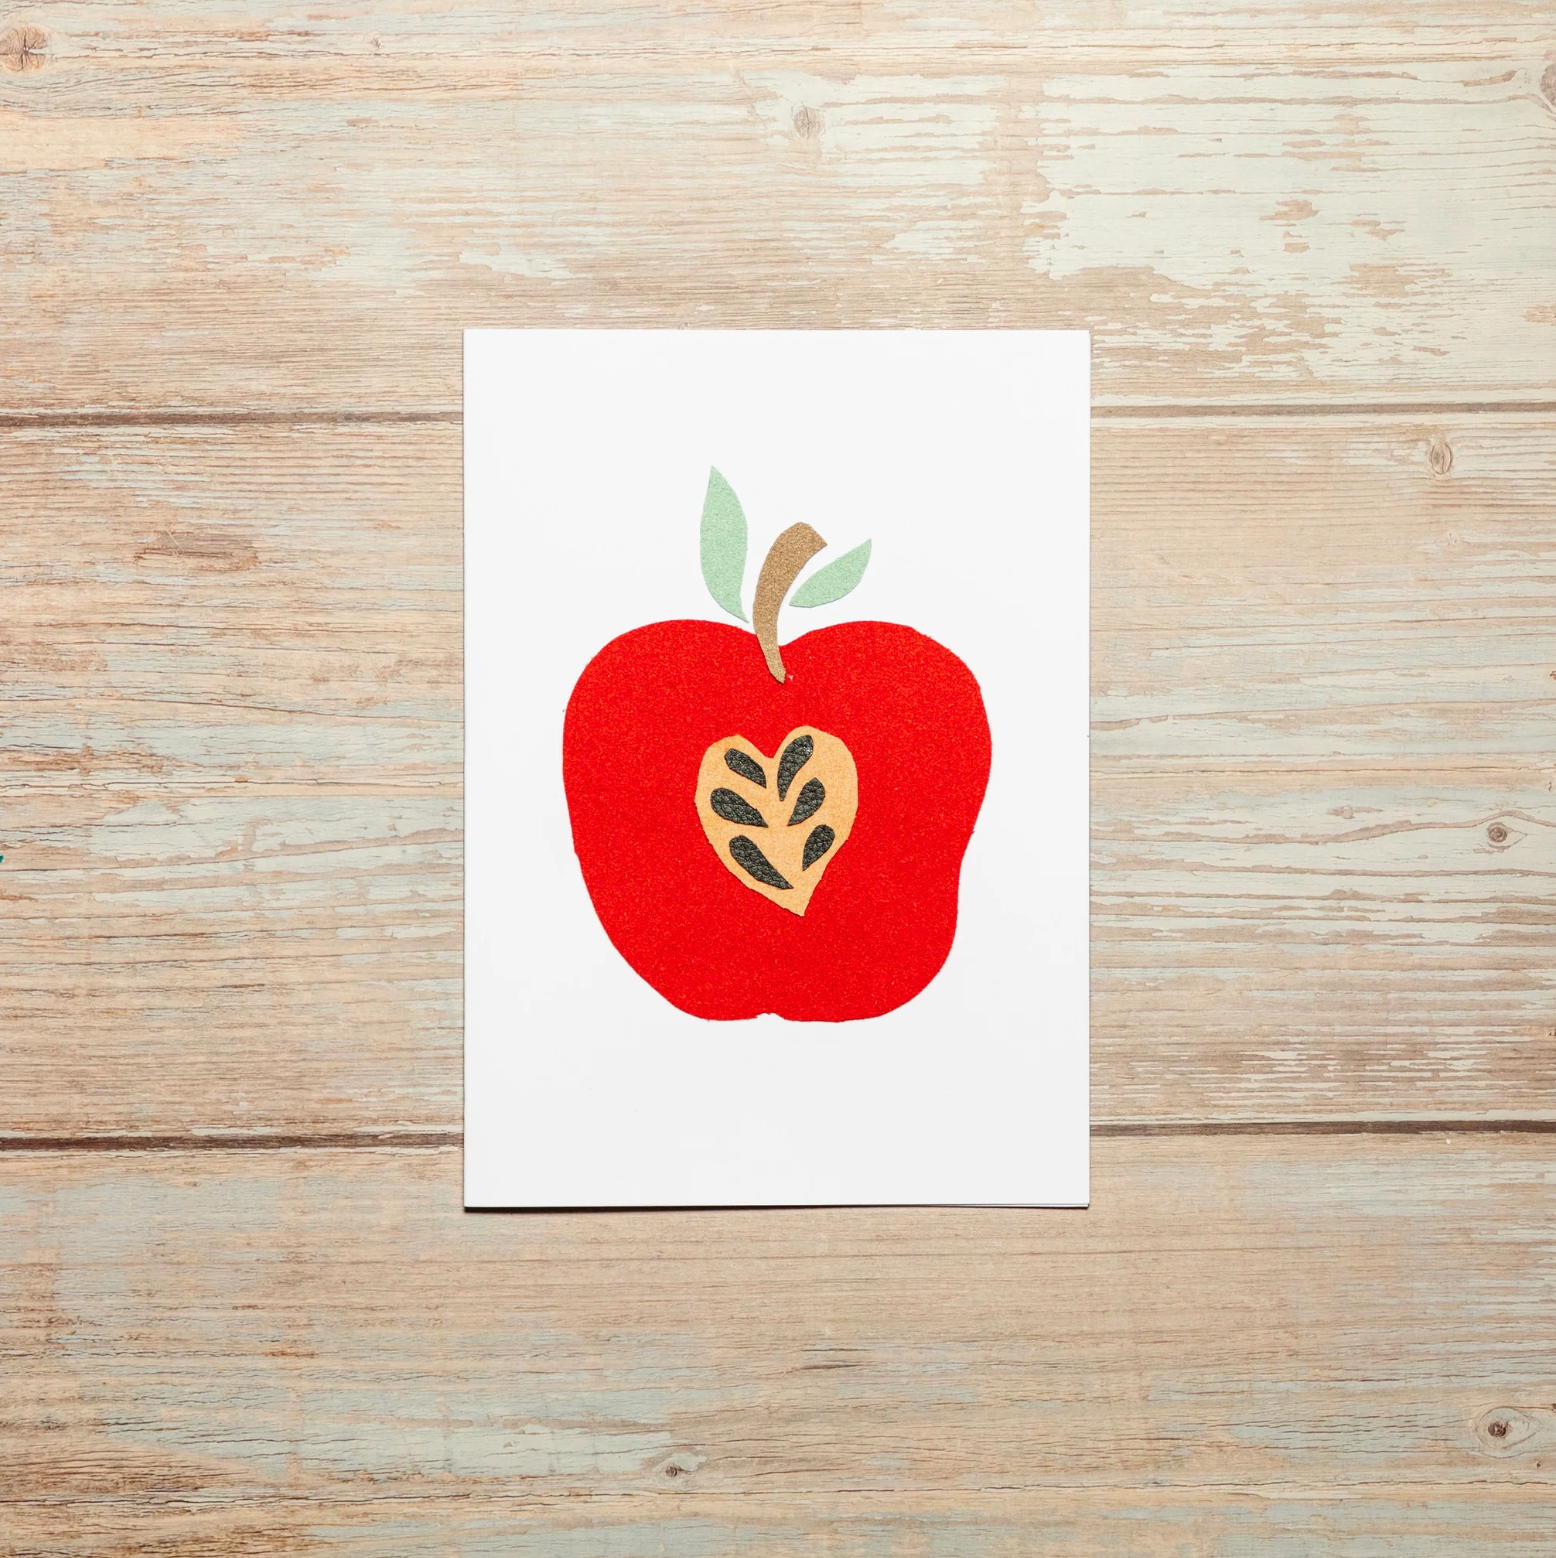 Greeting card with a bright red apple design on a wooden surface